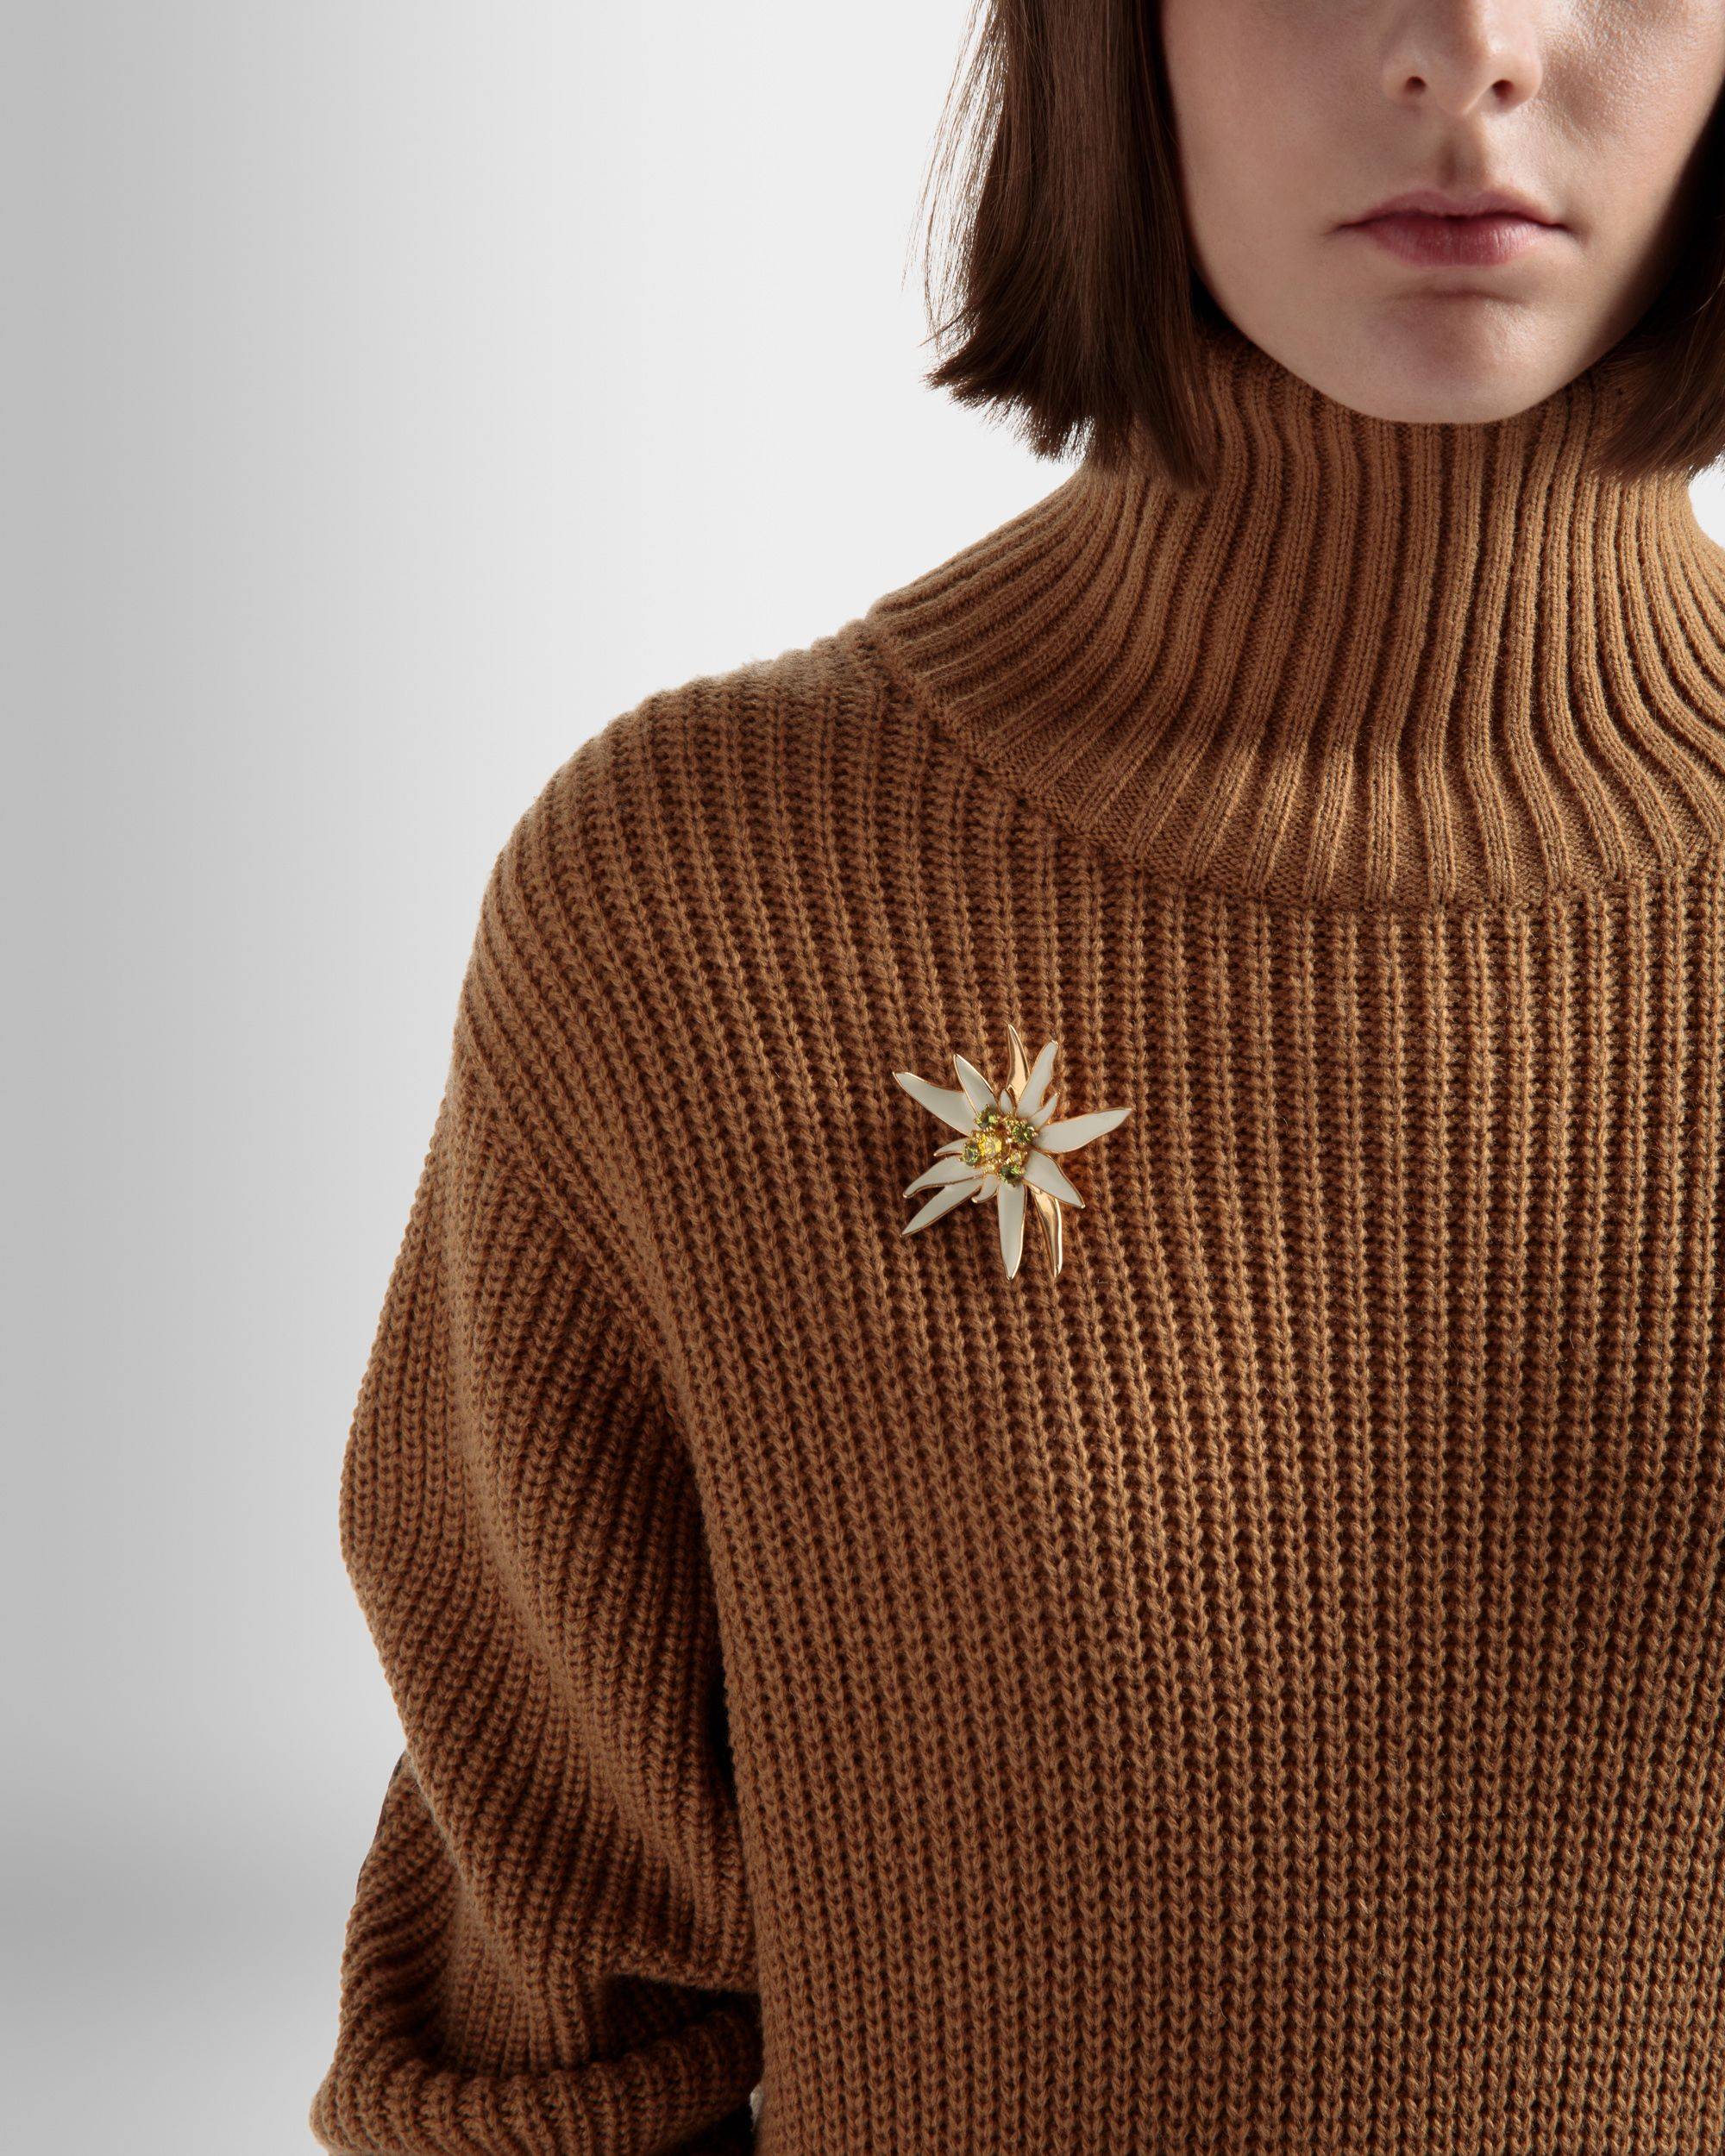 Edelweiss Brooch | Women's Brooch | Hammered Gold | Bally | On Model Front